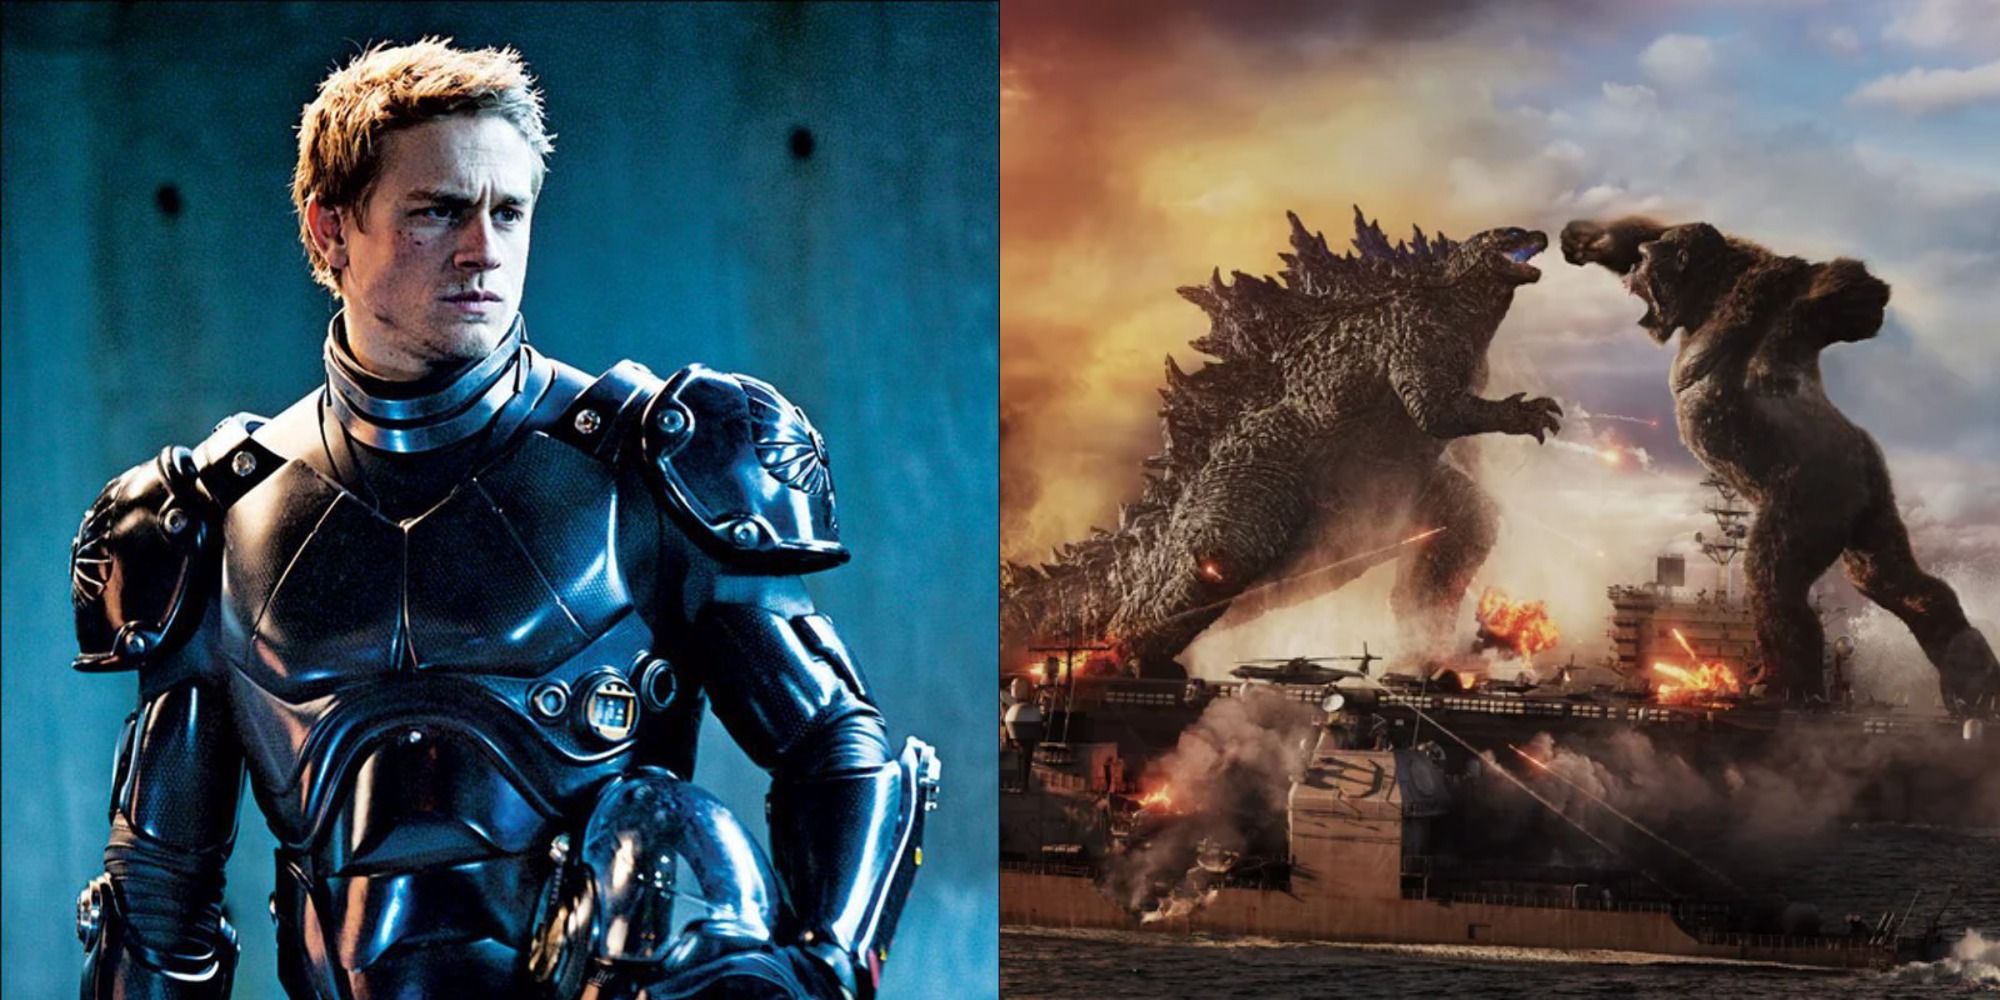 Split image showing Raleigh Becket in Pacific Rim and Godzilla fighting Kong in Godzilla vs. Kong